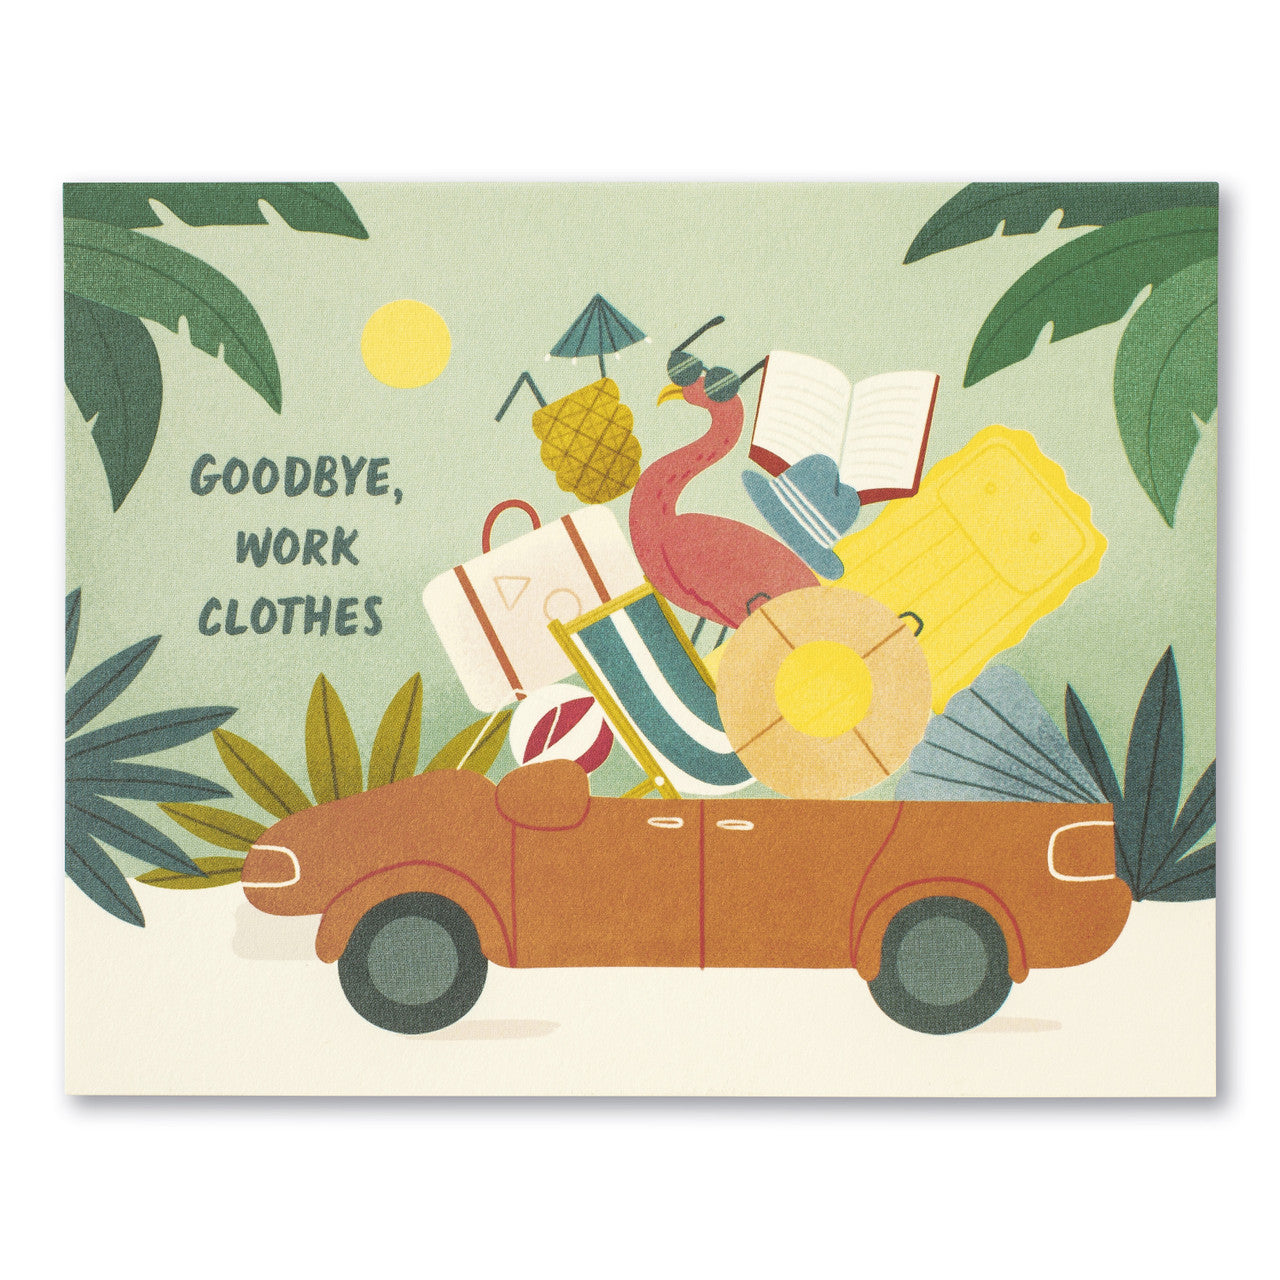 Retirement Card - Goodbye, Work Clothes